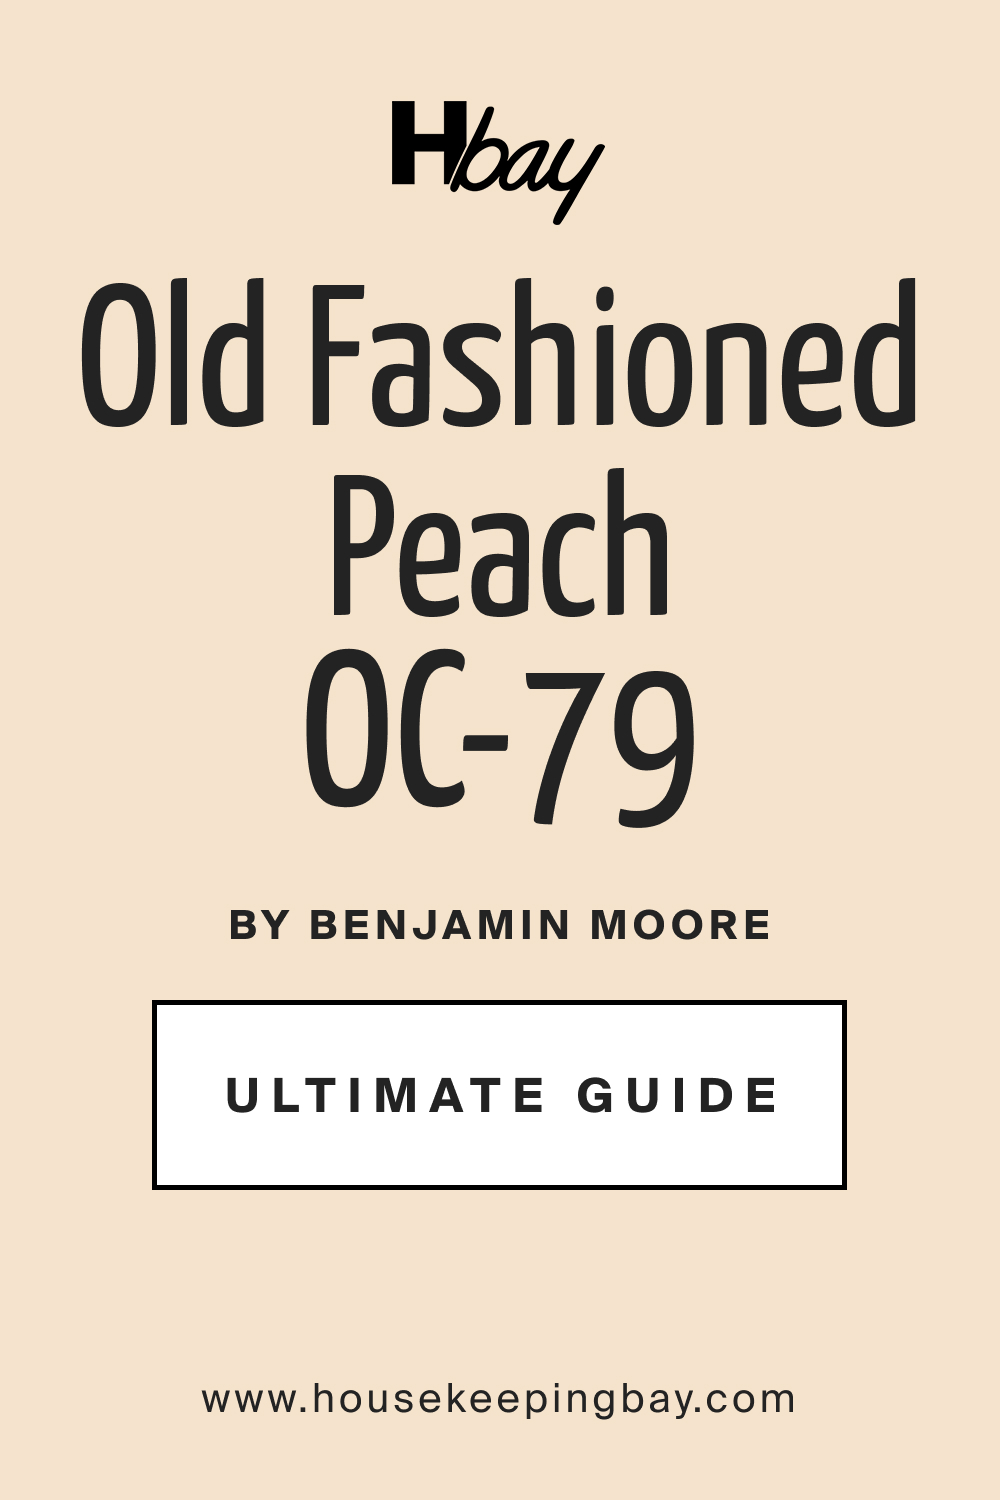 Old Fashioned Peach OC 79 by Benjamin Moore Ultimate Guide